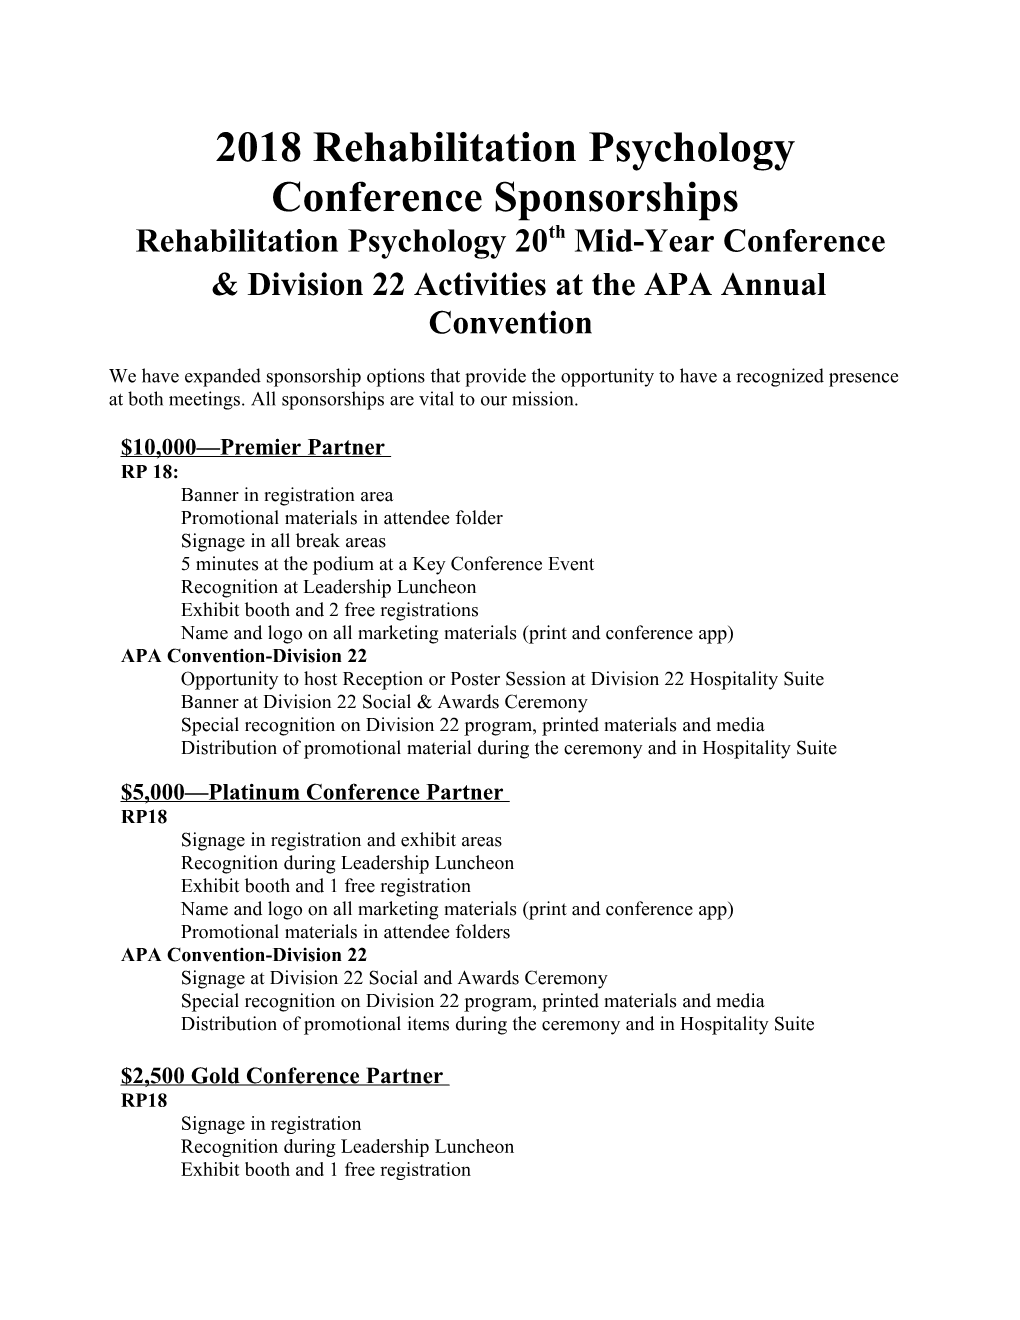 Rehabilitation Psychology 20Th Mid-Year Conference